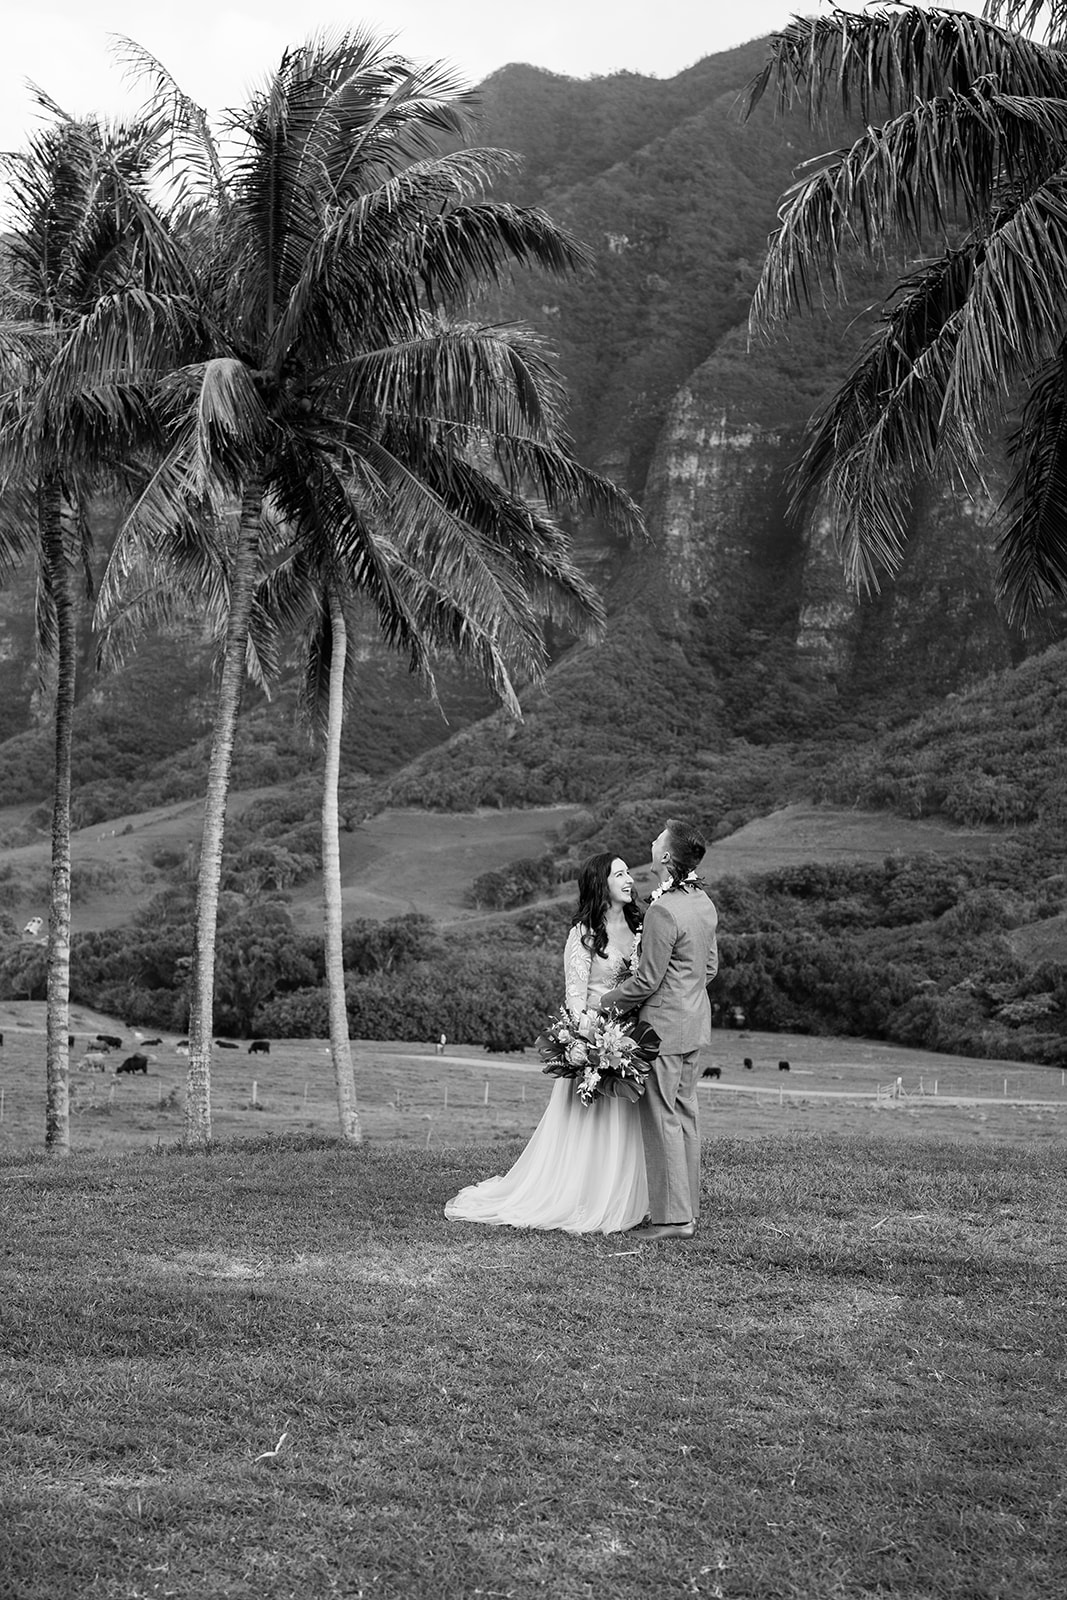 A bride and groom standing in front of palm trees at a Kualoa Ranch Wedding.